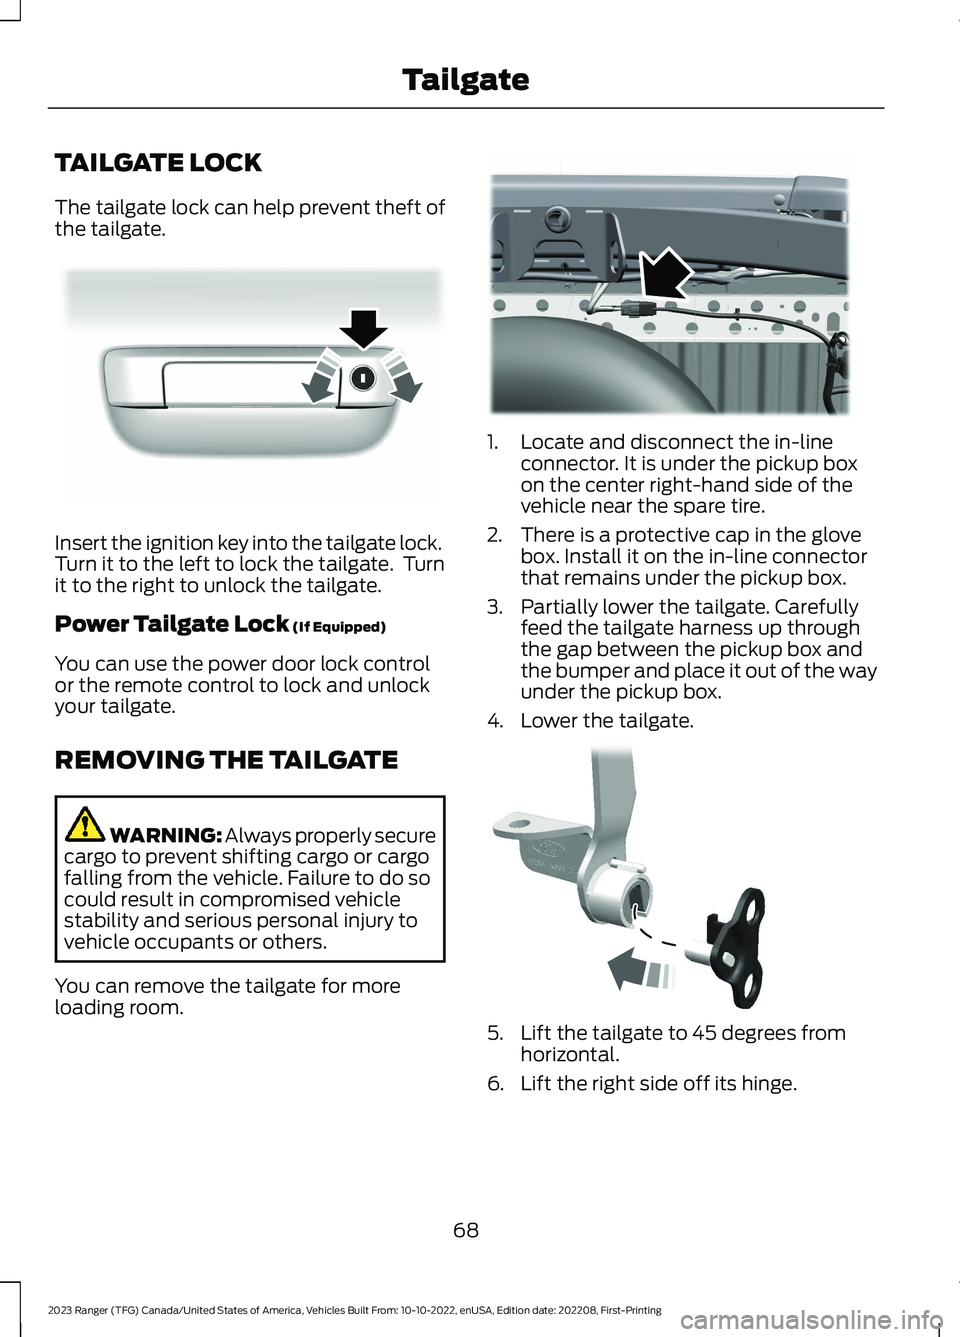 FORD RANGER 2023  Owners Manual TAILGATE LOCK
The tailgate lock can help prevent theft ofthe tailgate.
Insert the ignition key into the tailgate lock.Turn it to the left to lock the tailgate.  Turnit to the right to unlock the tailg